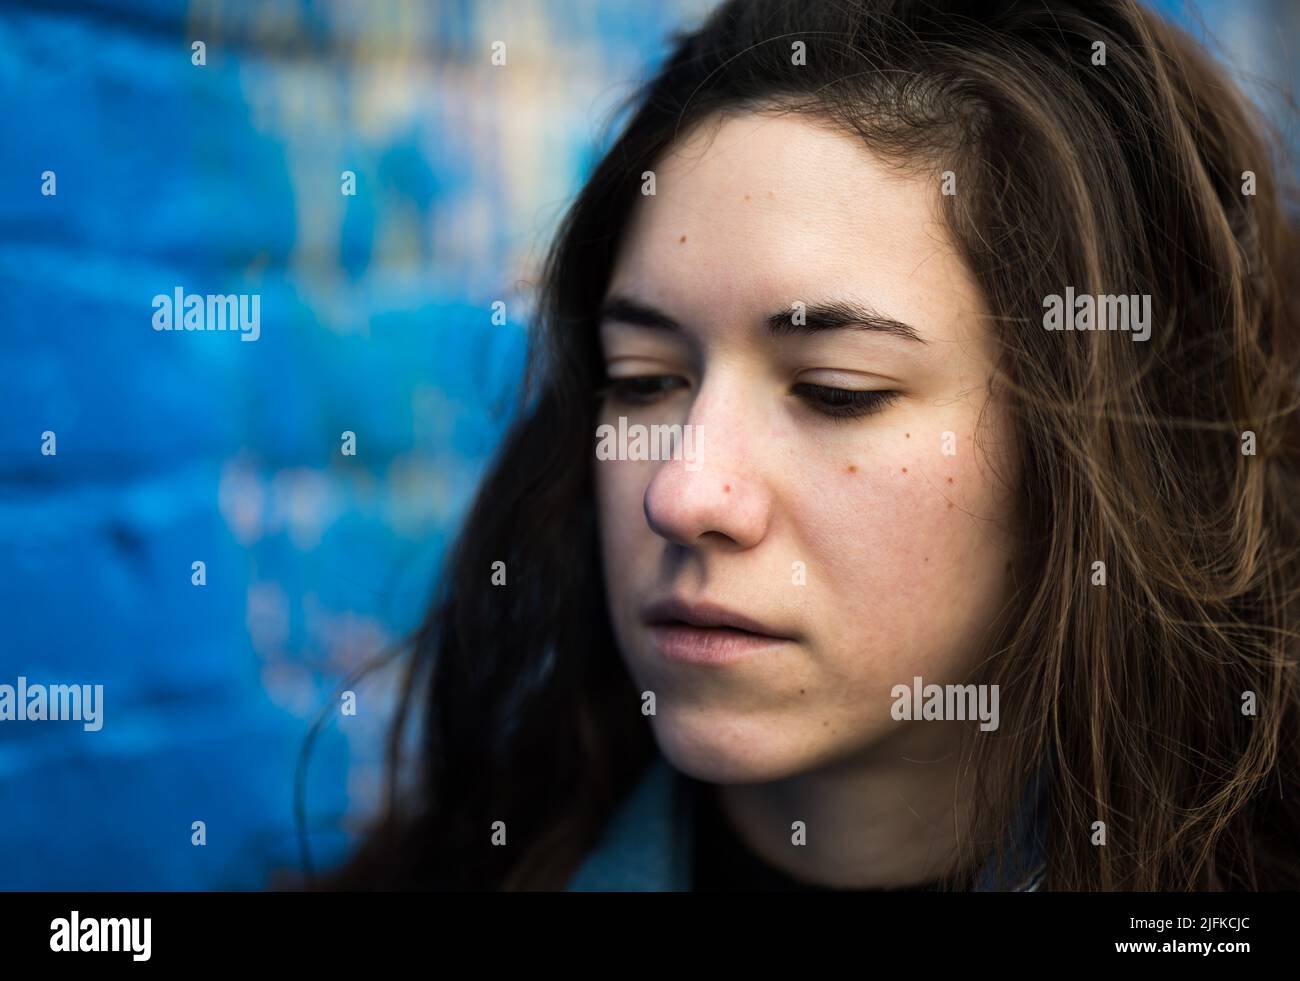 Close Up Of An Attractive 27 Year Old Woman With Brown Hair Against A Blue Wall Brussels